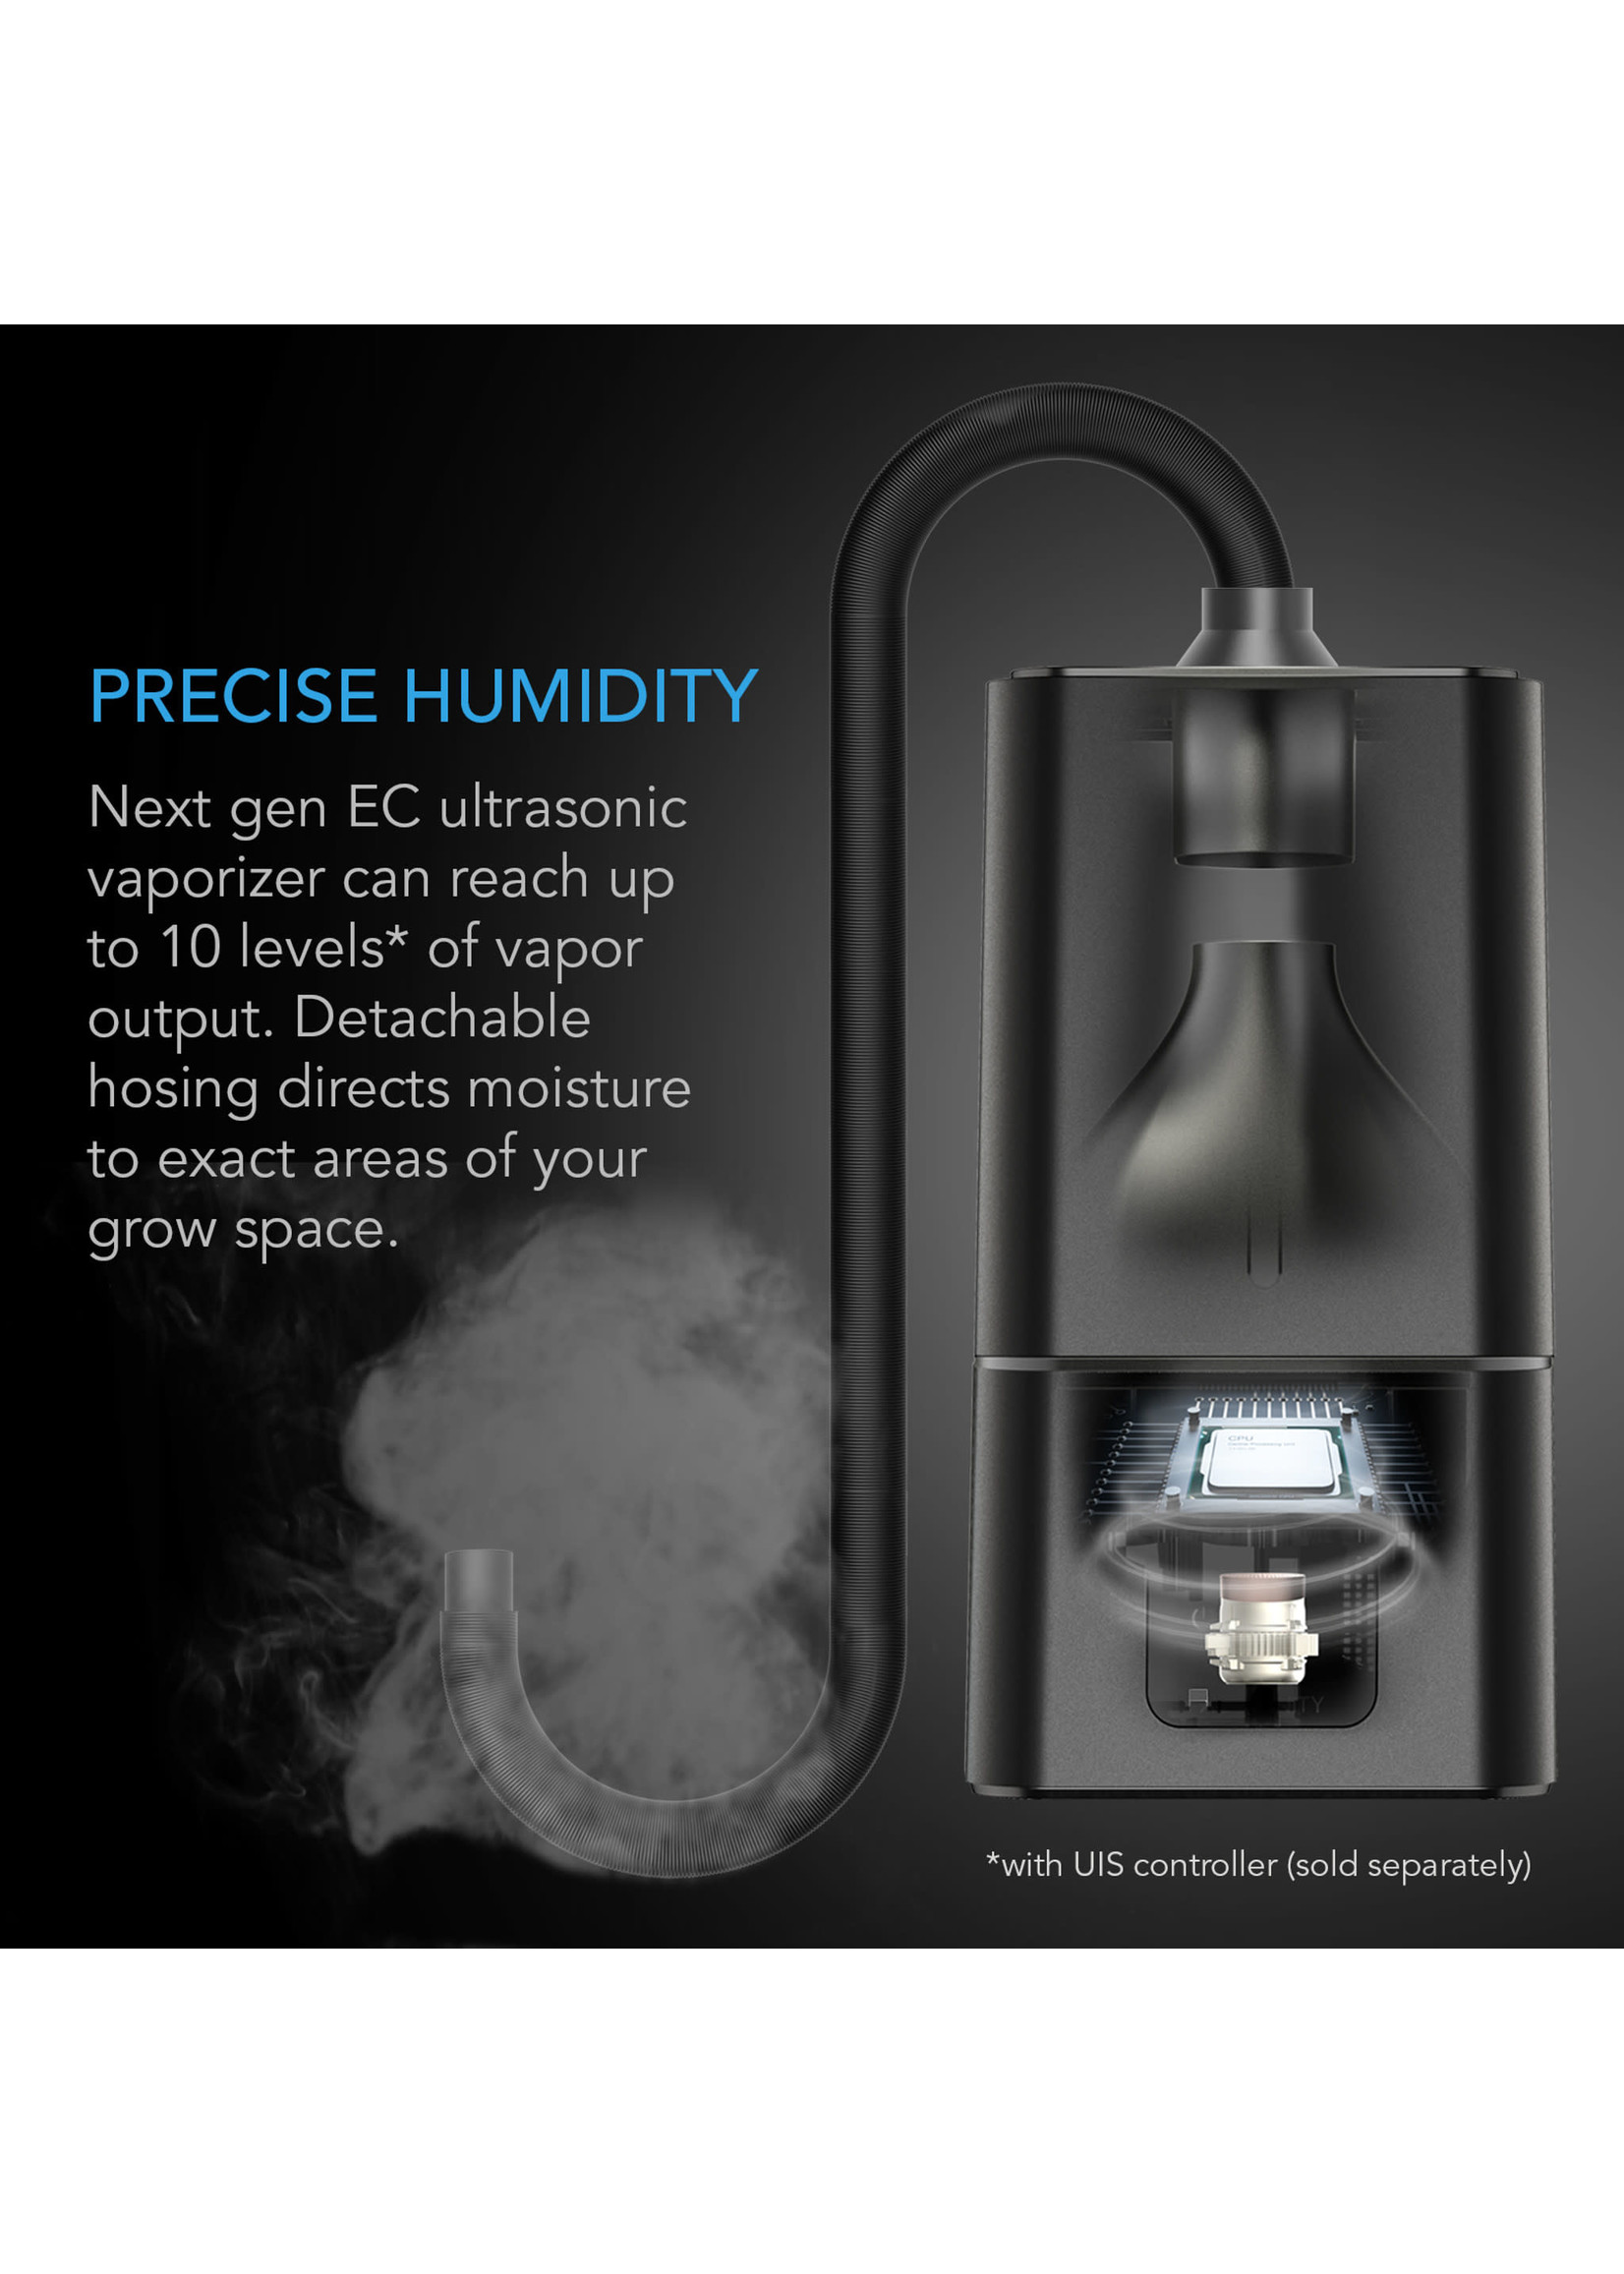 AC Infinity CLOUDFORGE T7, ENVIRONMENTAL PLANT HUMIDIFIER, 15L, SMART CONTROLS, TARGETED VAPORIZING